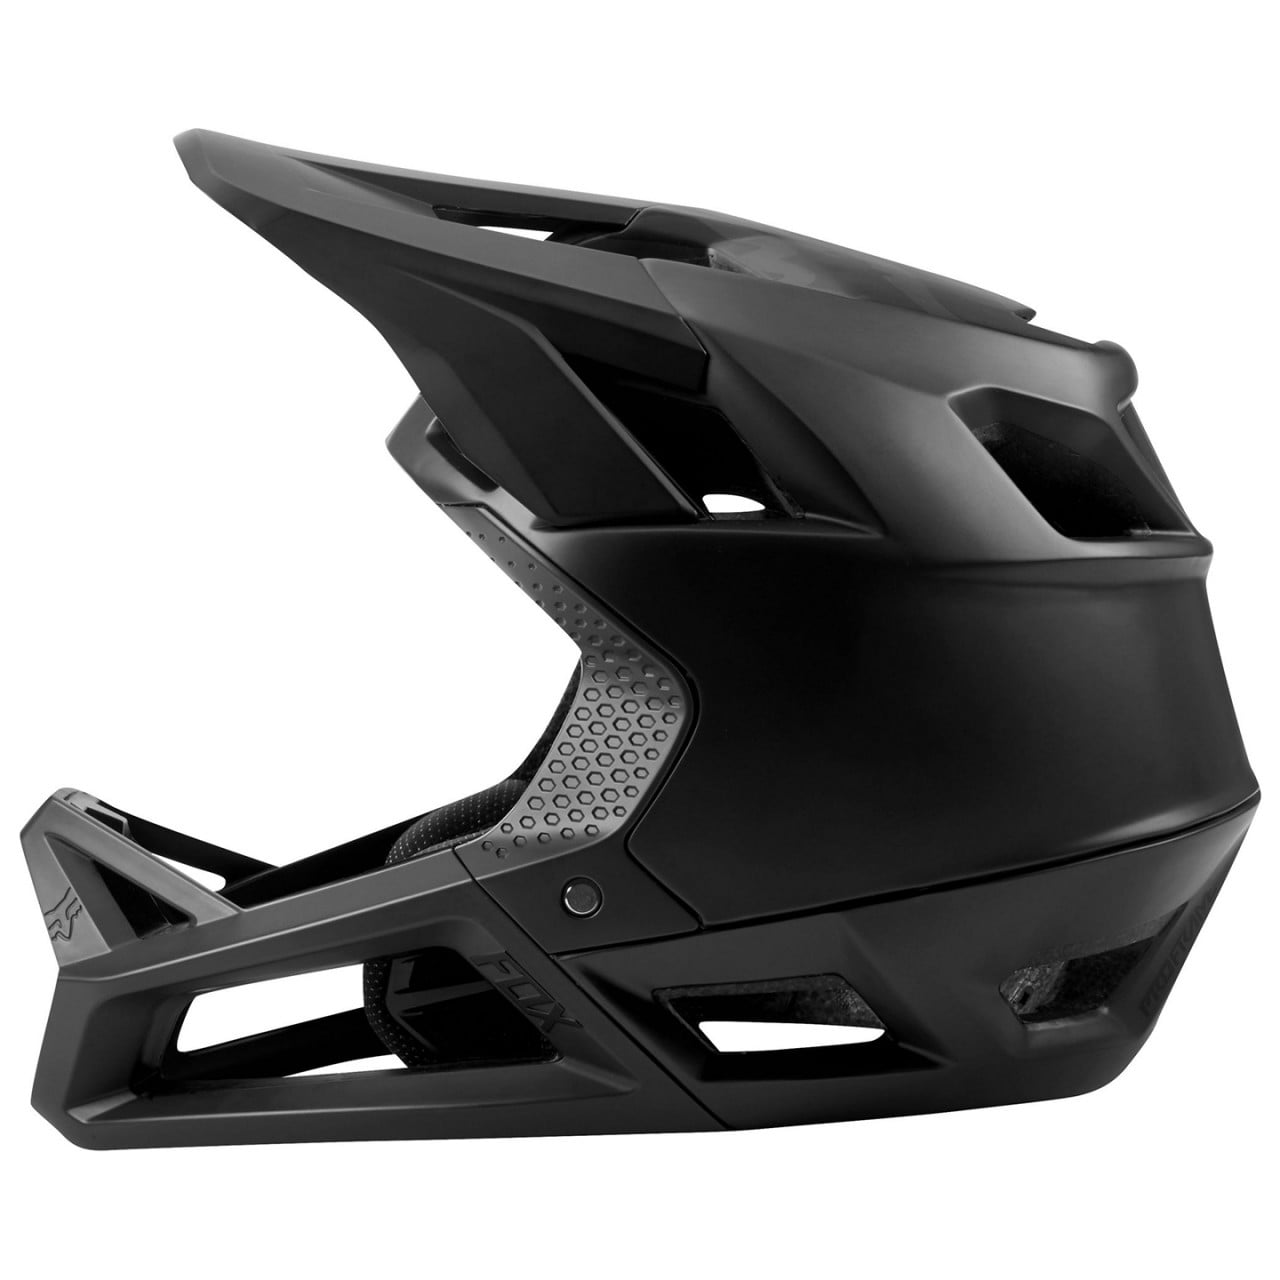 Kask rowerowy Full Face Proframe Mips